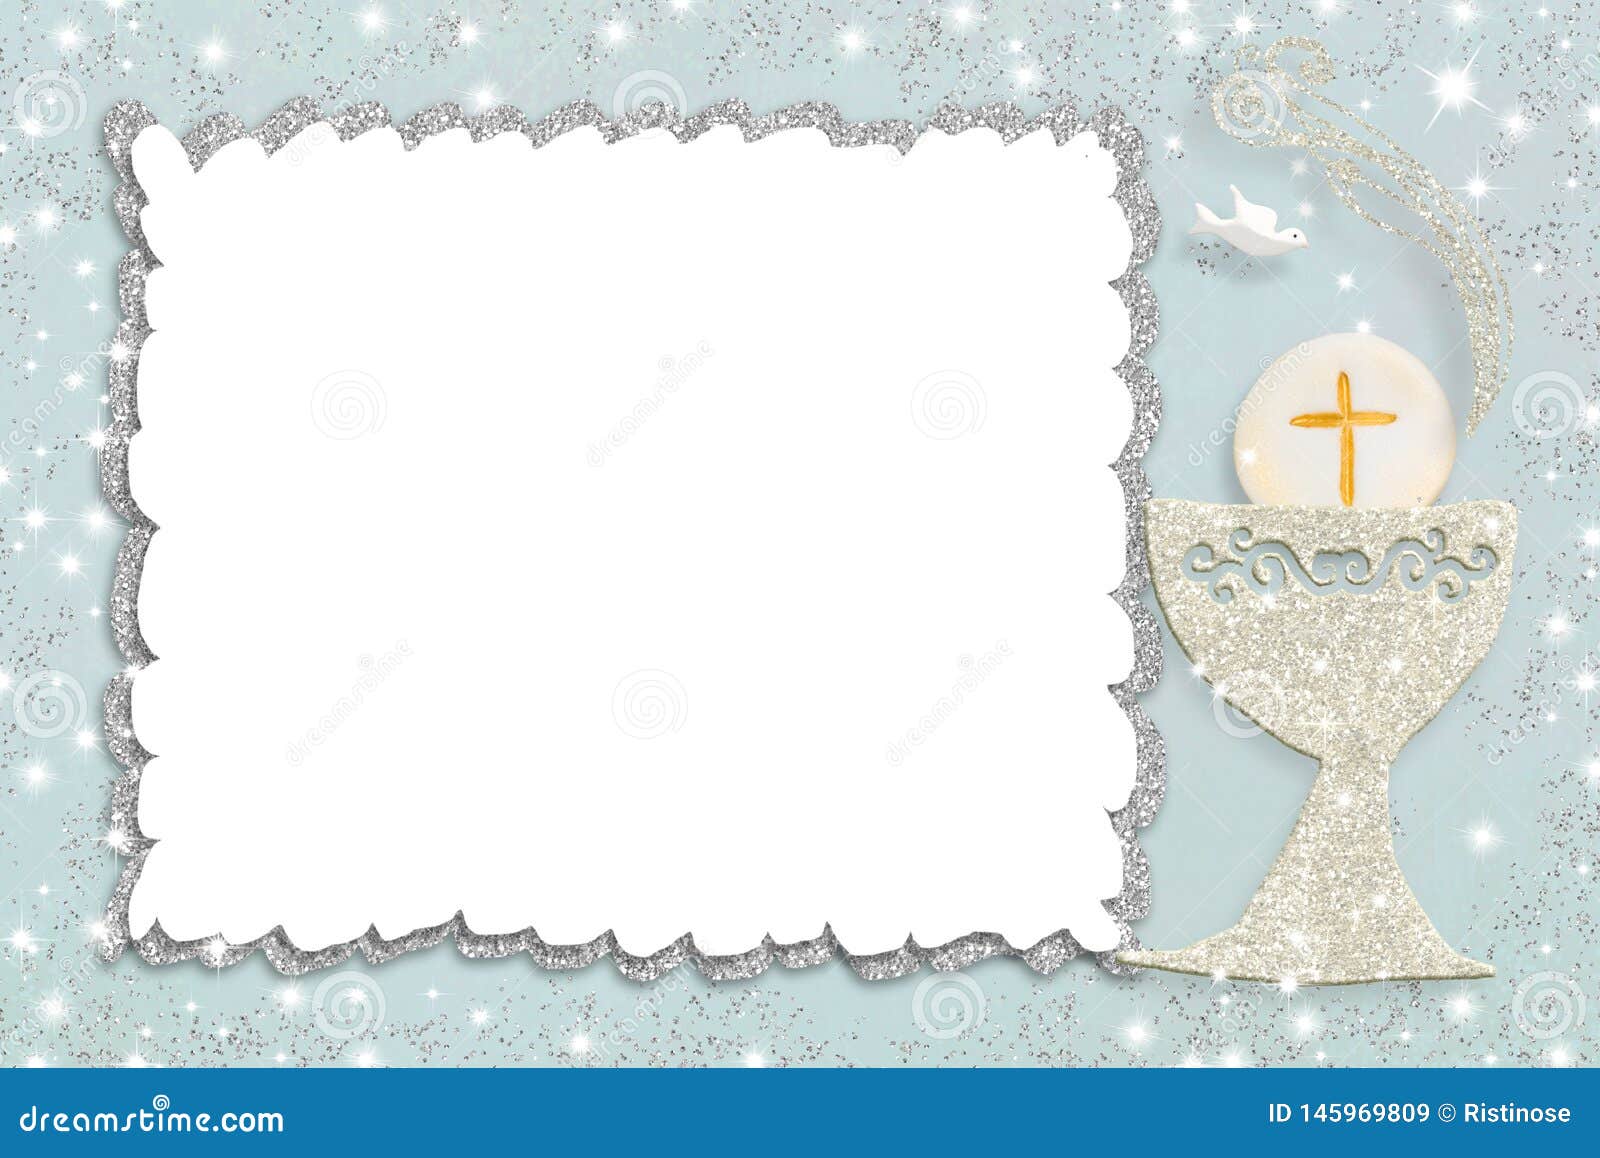 First Holy Communion Invitation Card Stock Image Image of